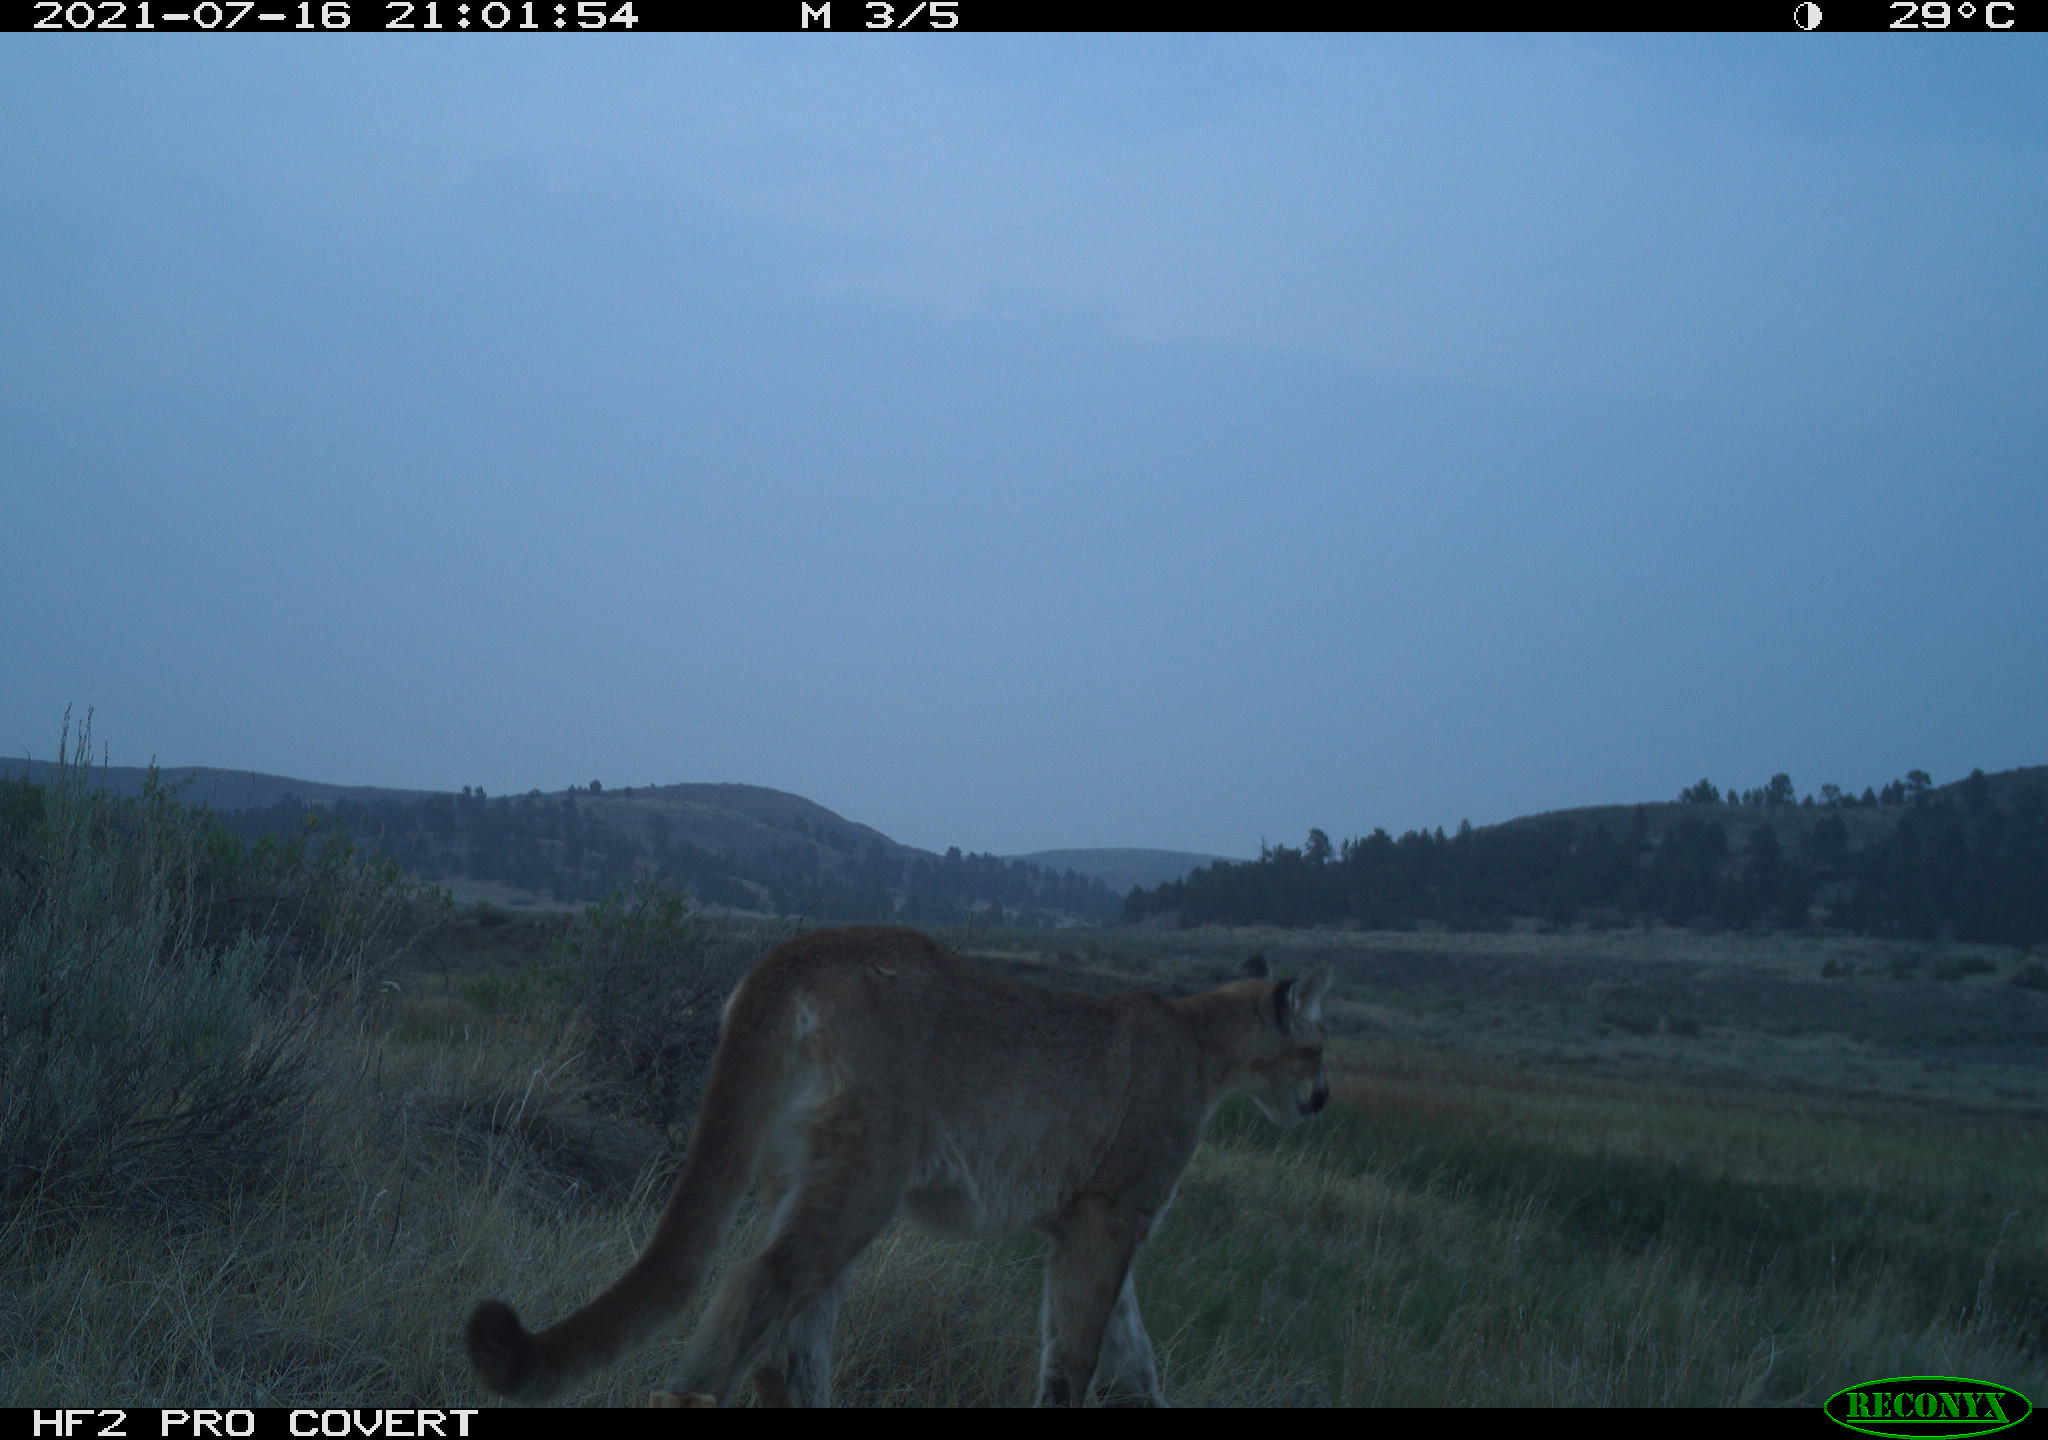 A mountain lion caught on a camera trap walking through a grassy area of the Northern Great Plains at dusk